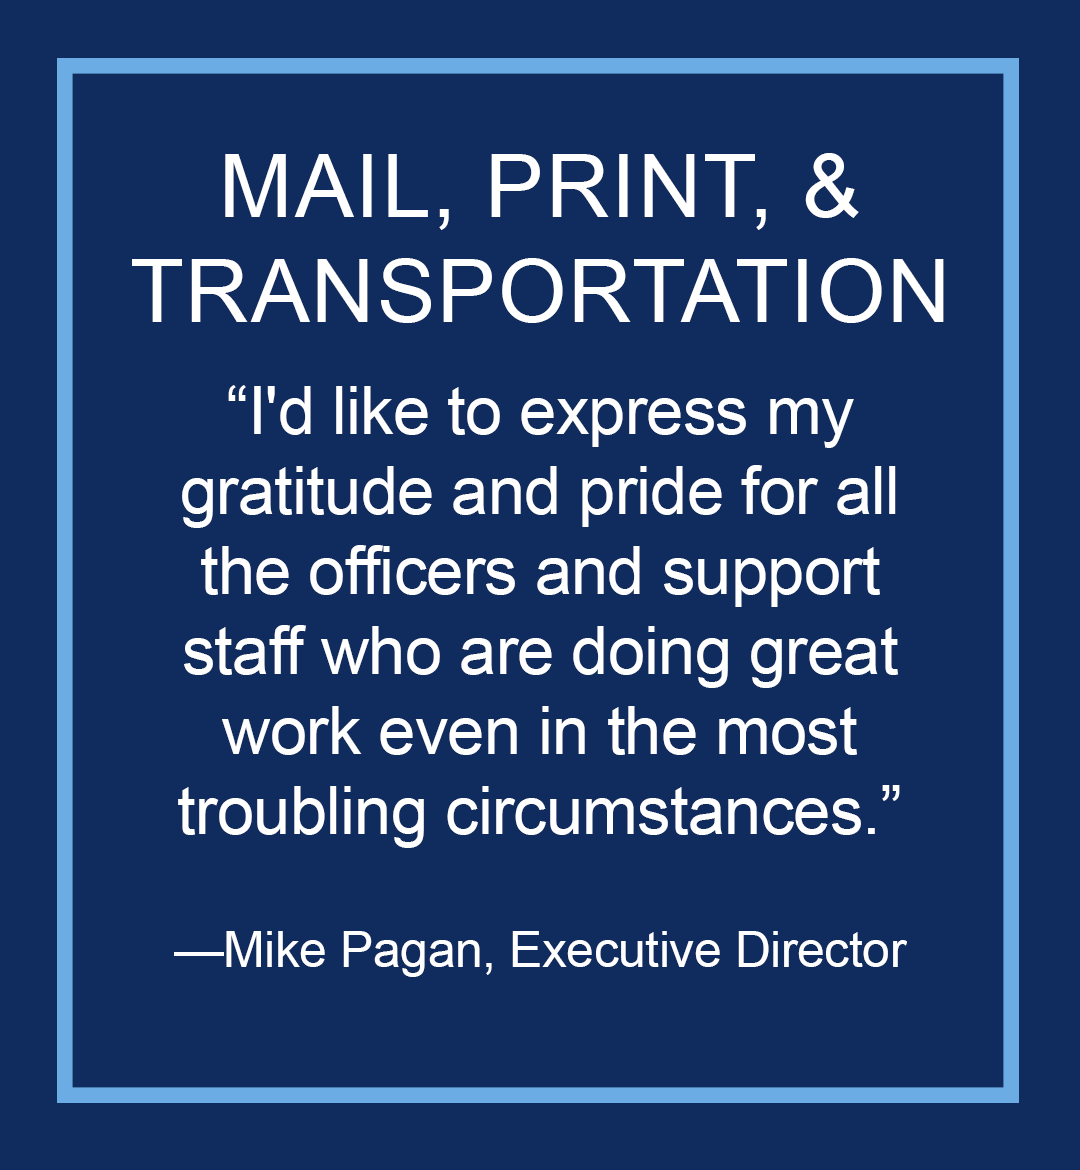 Image with text: Mail, Print, and Transportation, "I'd like to express my gratitude and pride for all the officers and support staff who are doing great work even in the most troubling circumstances," Mike Pagan, Executive Director of Administrative Services